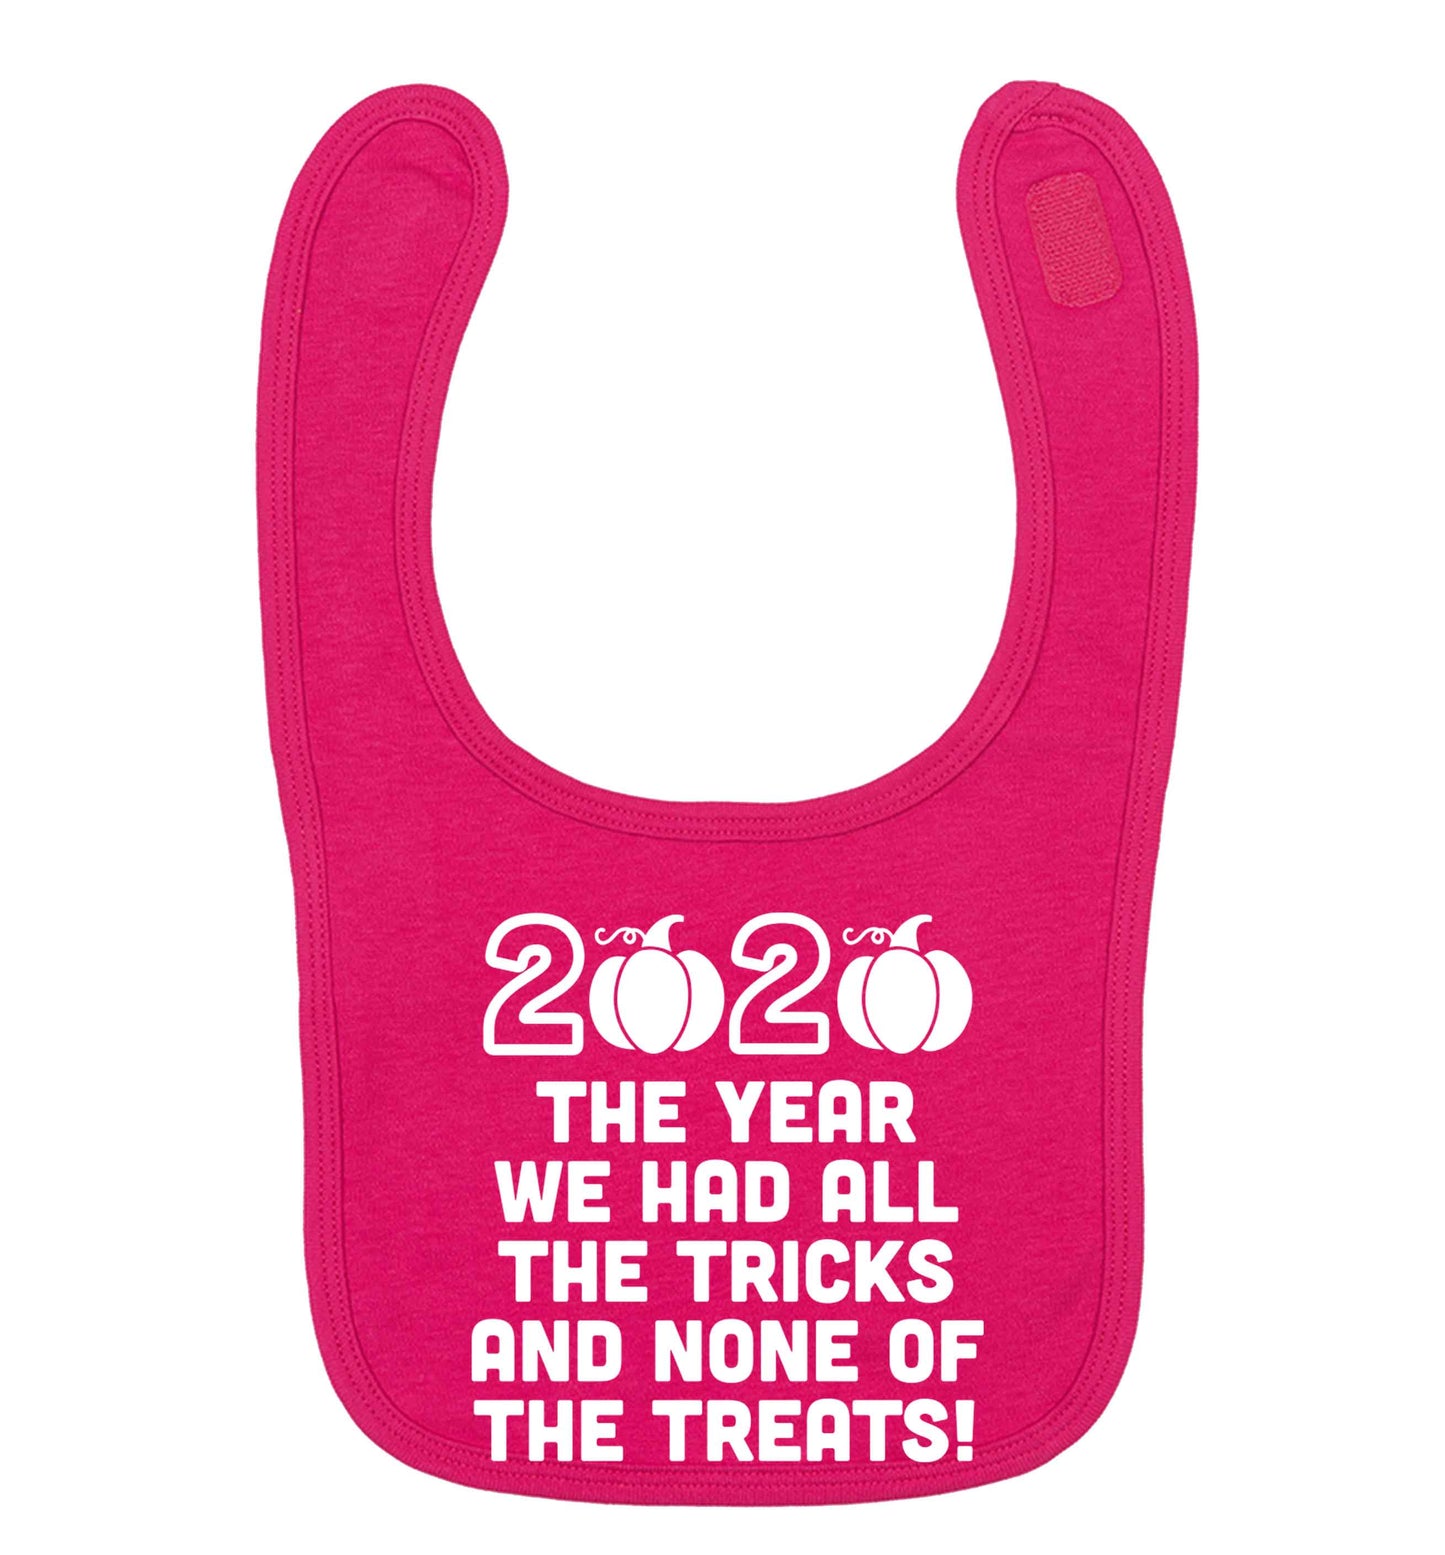 2020 The year we had all of the tricks and none of the treats dark pink baby bib